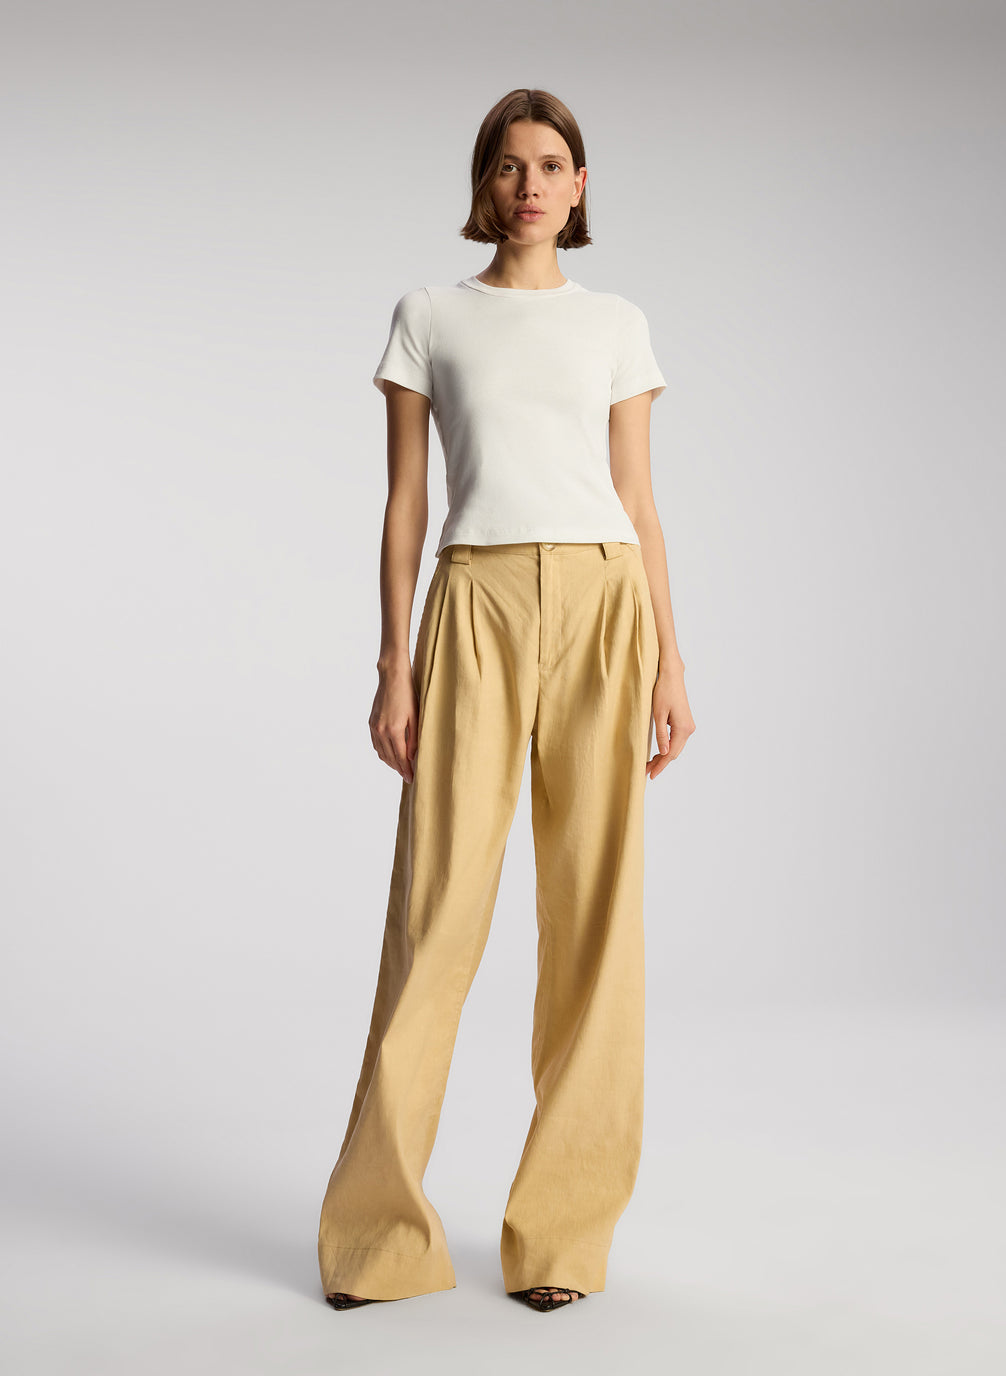 front view of woman wearing white tshirt and beige wide leg pants